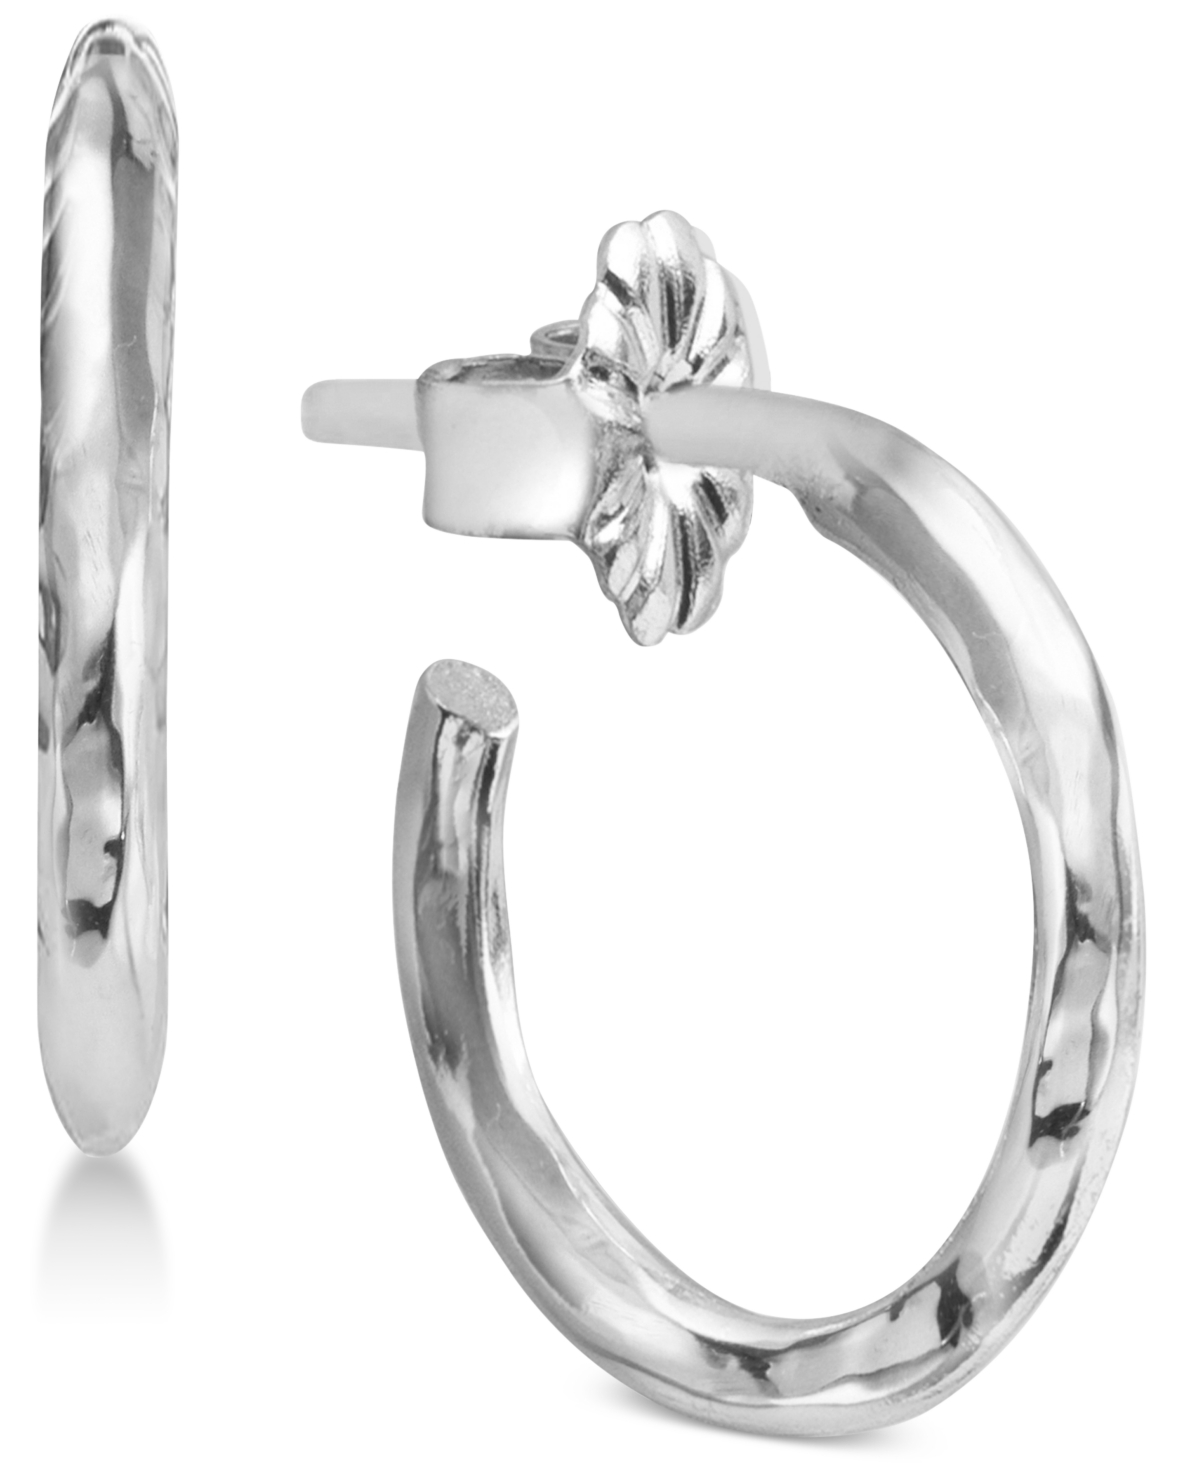 Argento Vivo Polished Hoop Earrings in Sterling Silver or Gold-Plated Sterling Silver